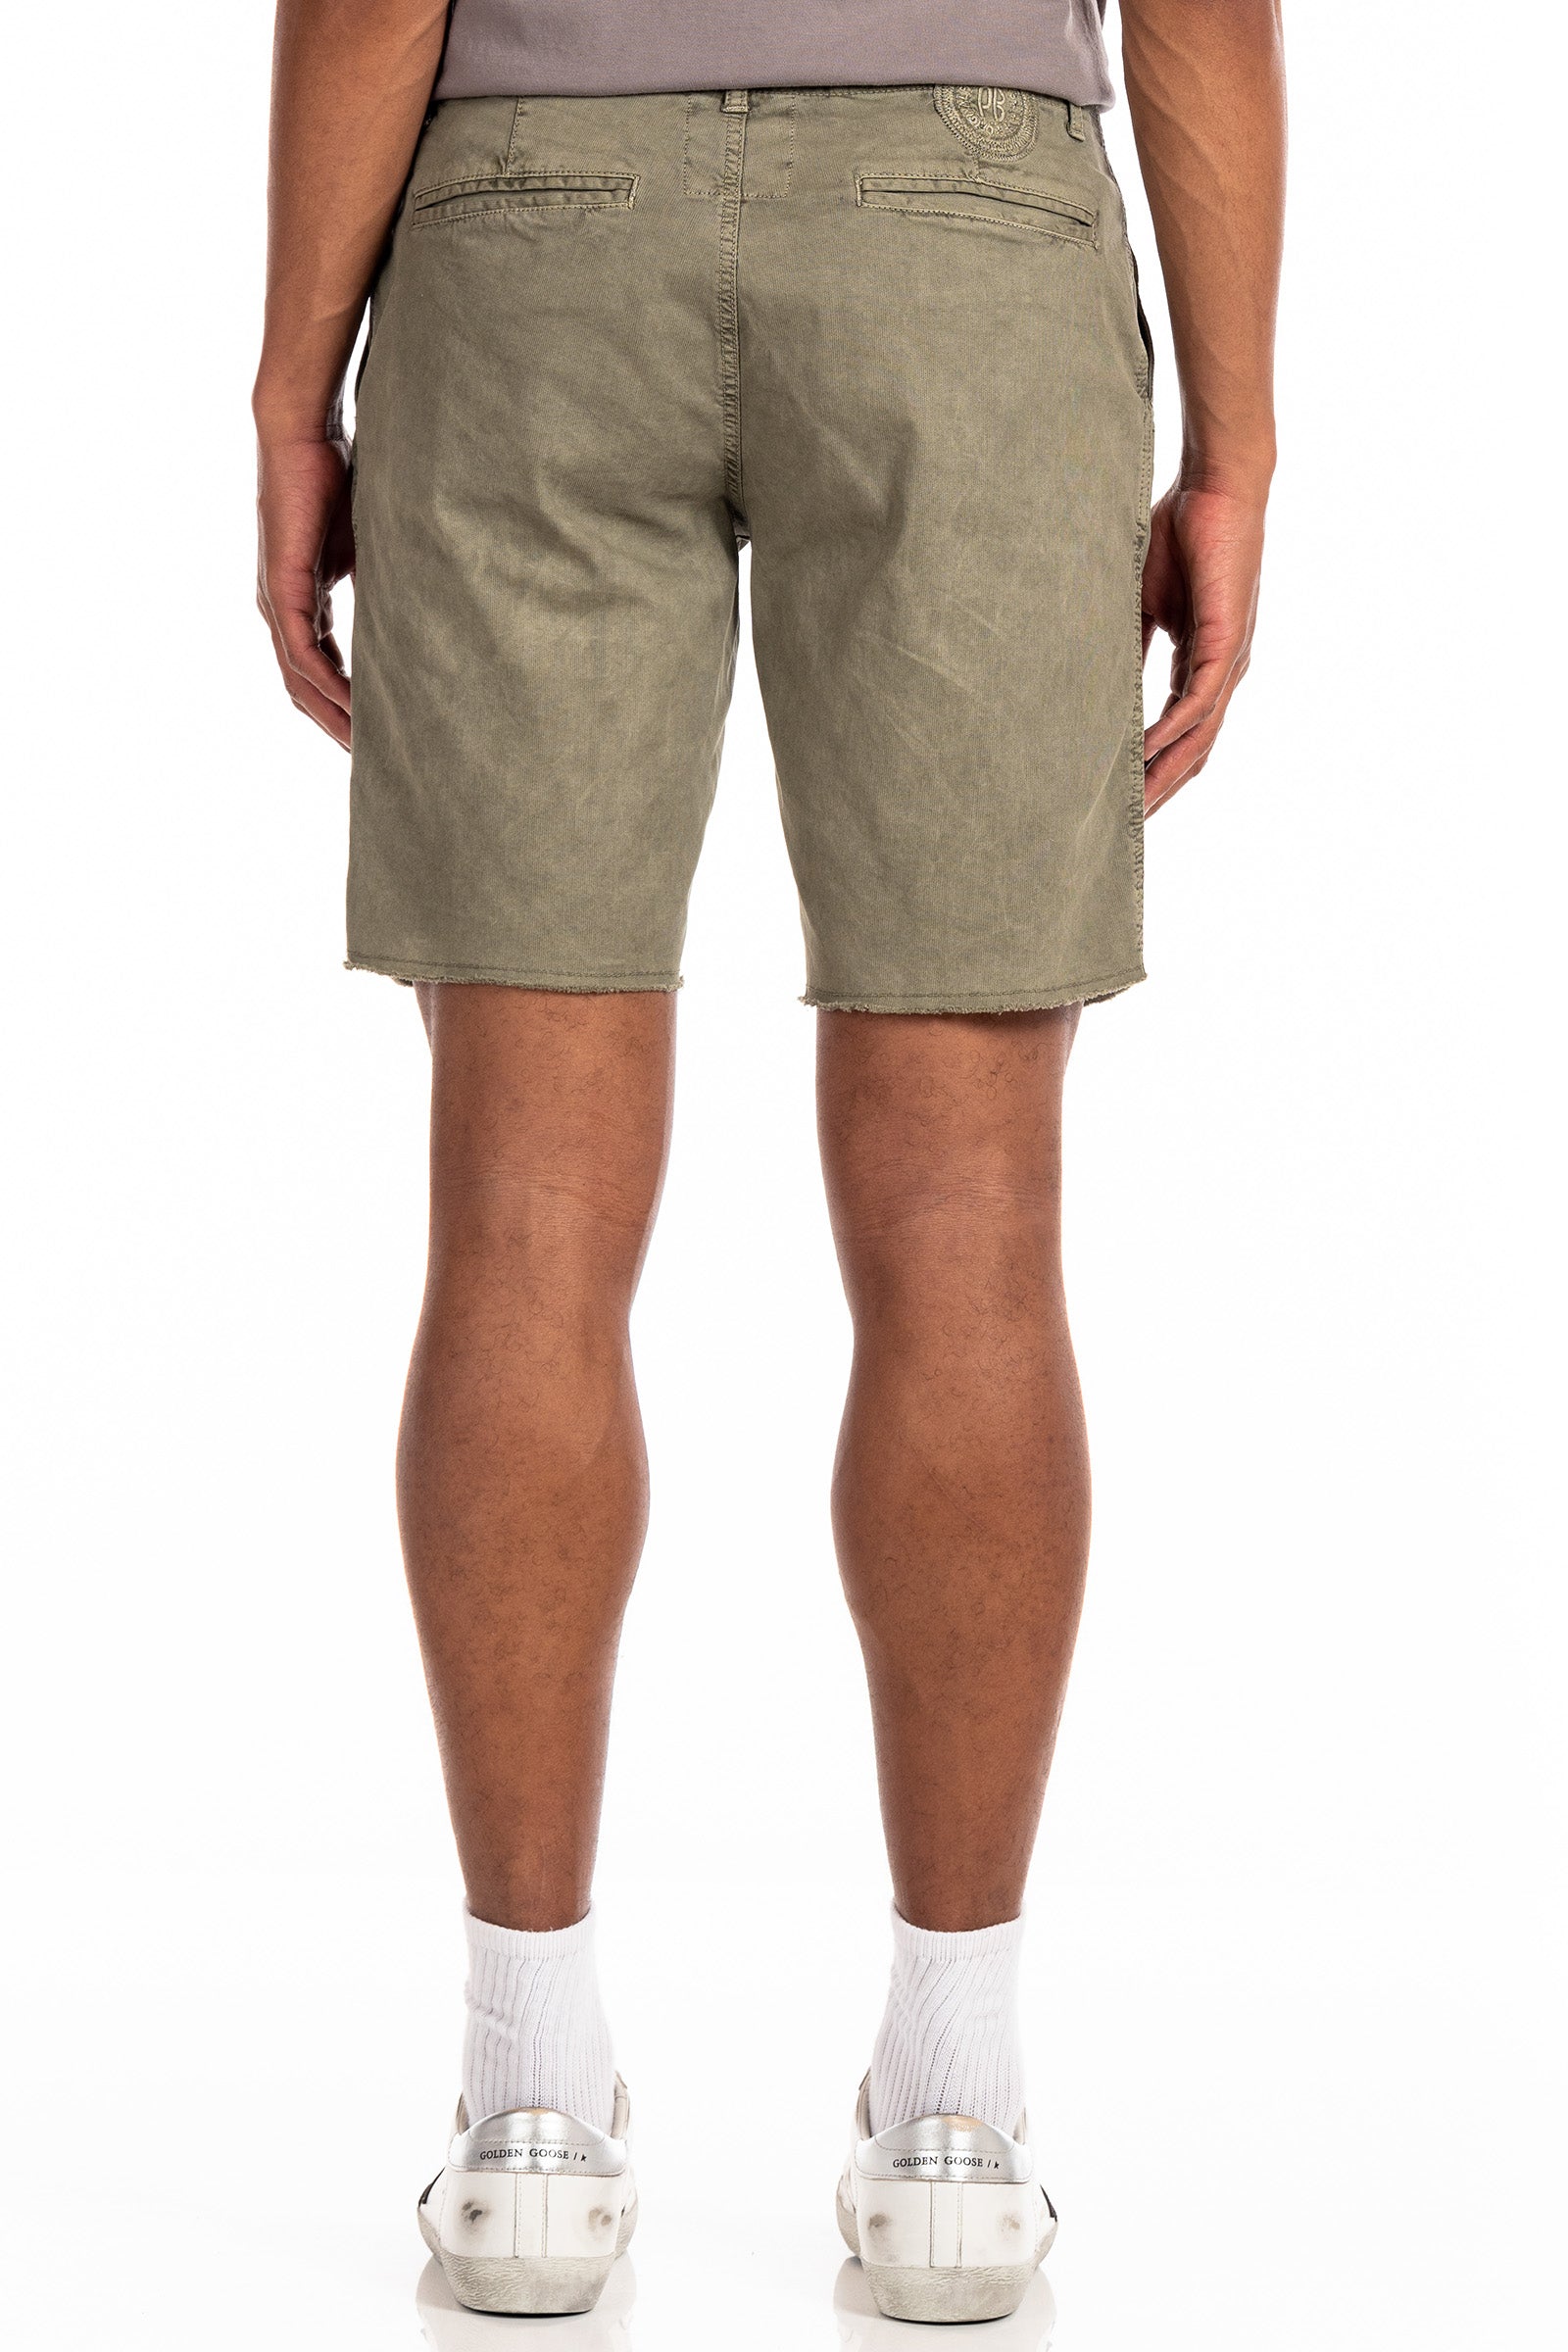 Original Paperbacks Brentwood Chino Short in Olive on Model Cropped Back View